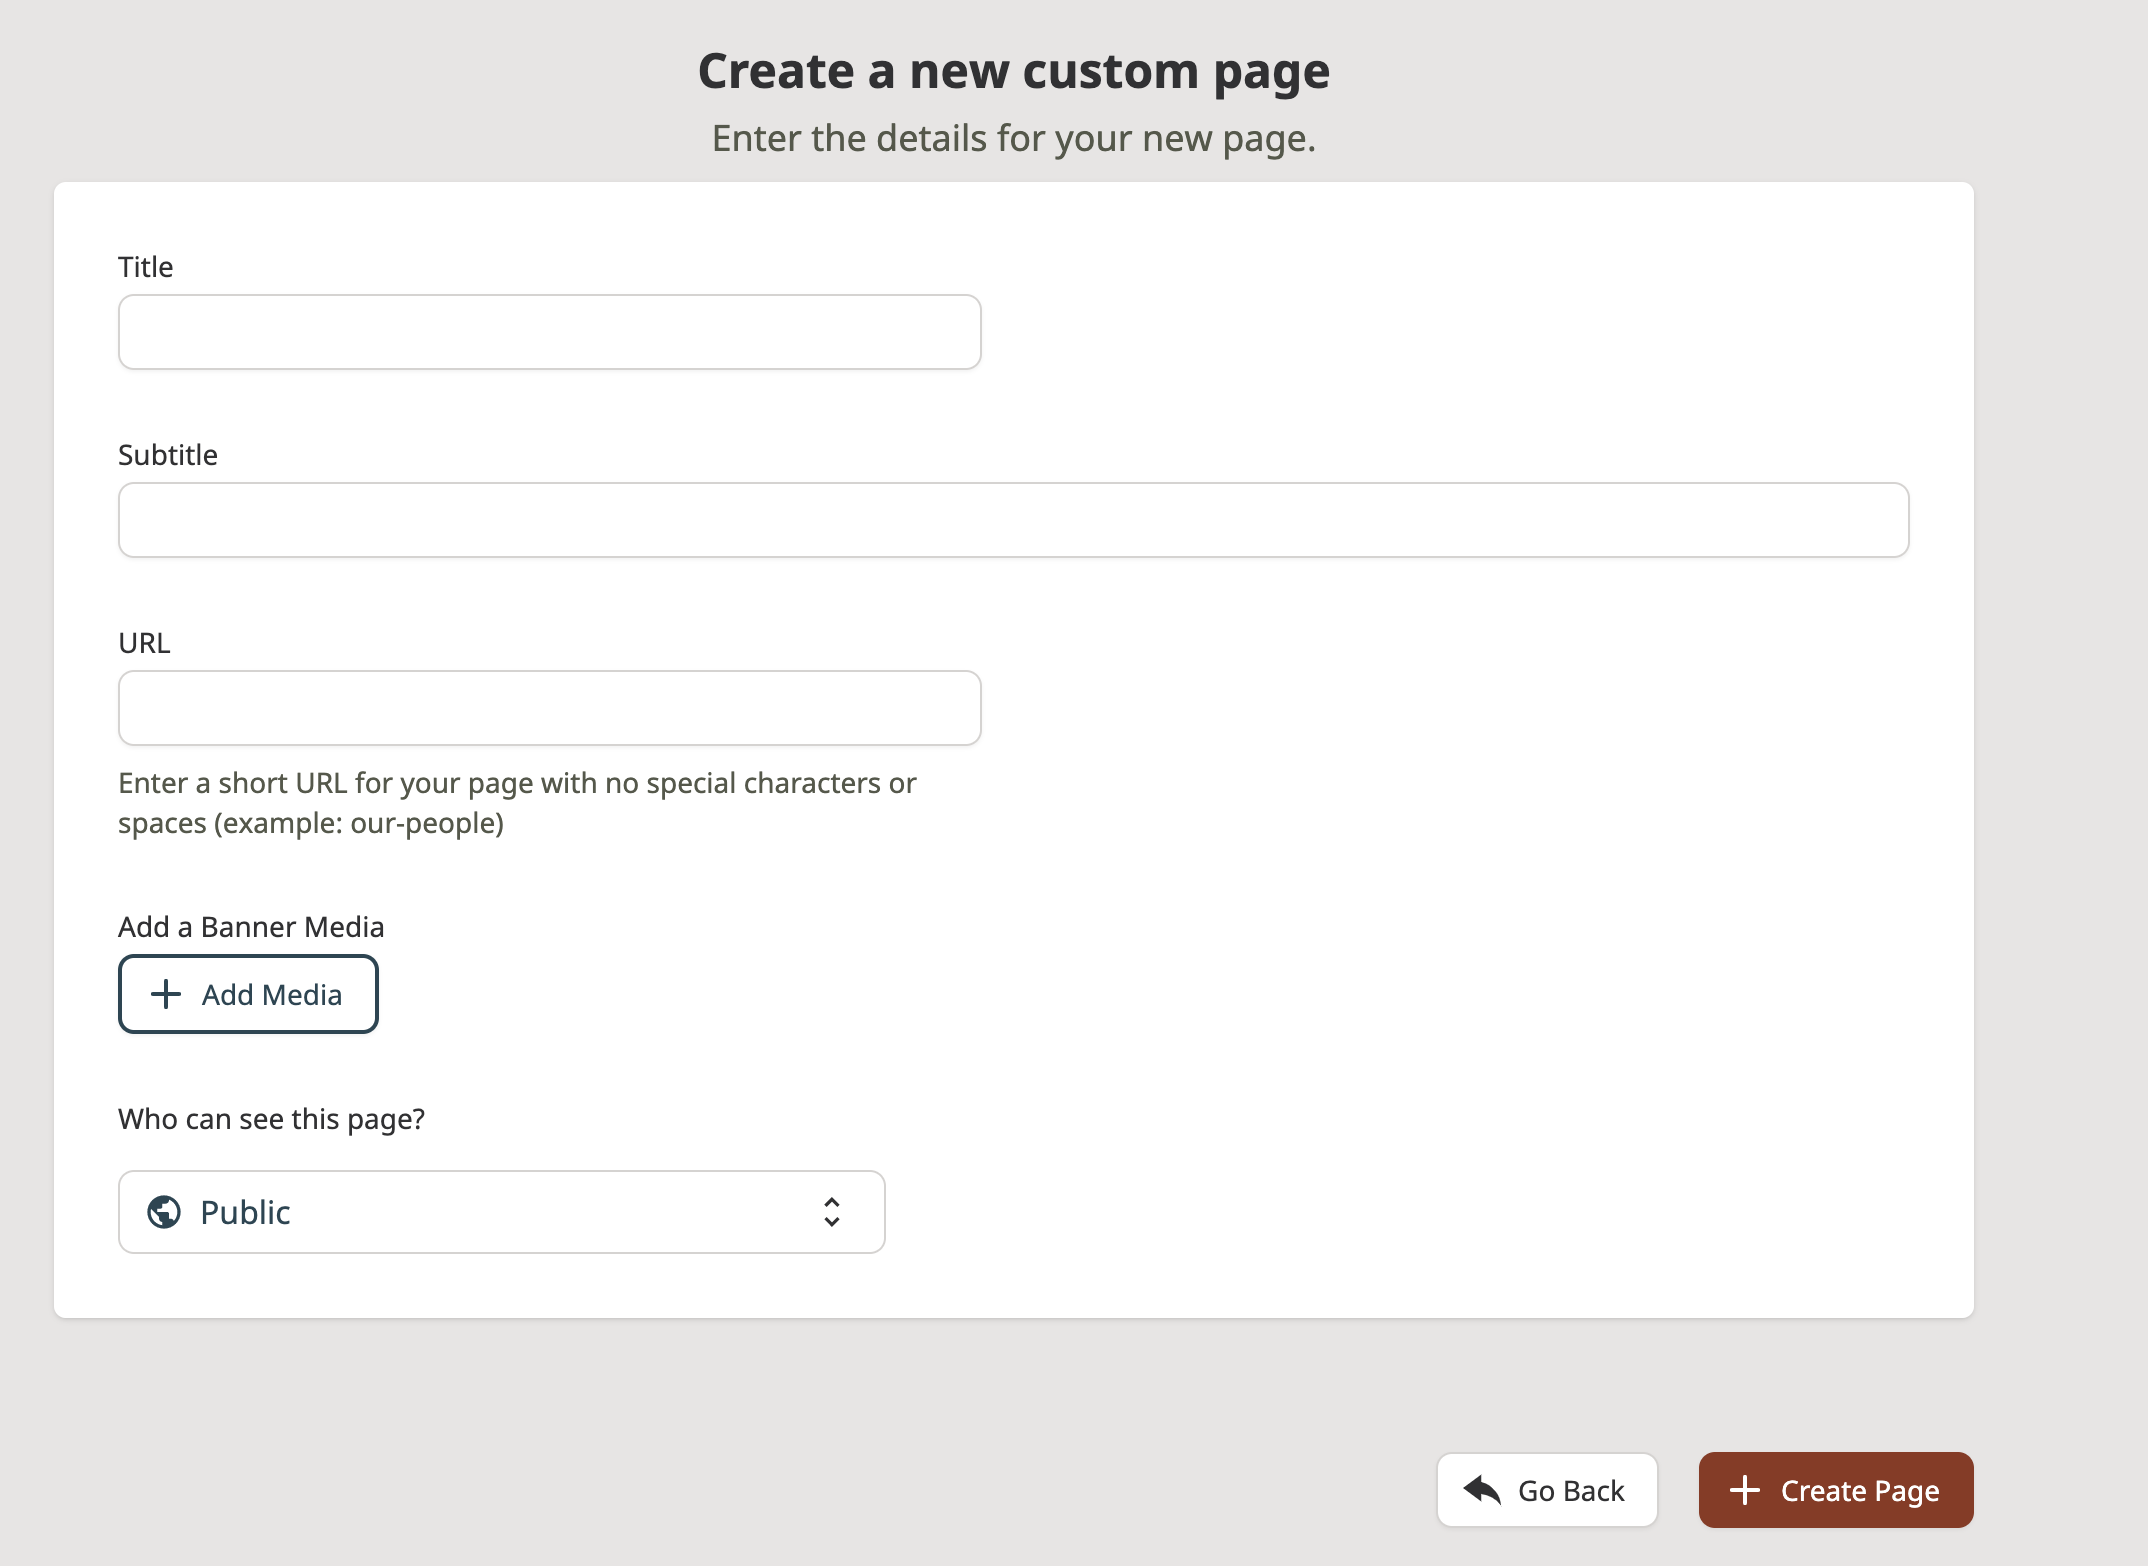 Screenshot of the form to create a custom page, all fields are empty